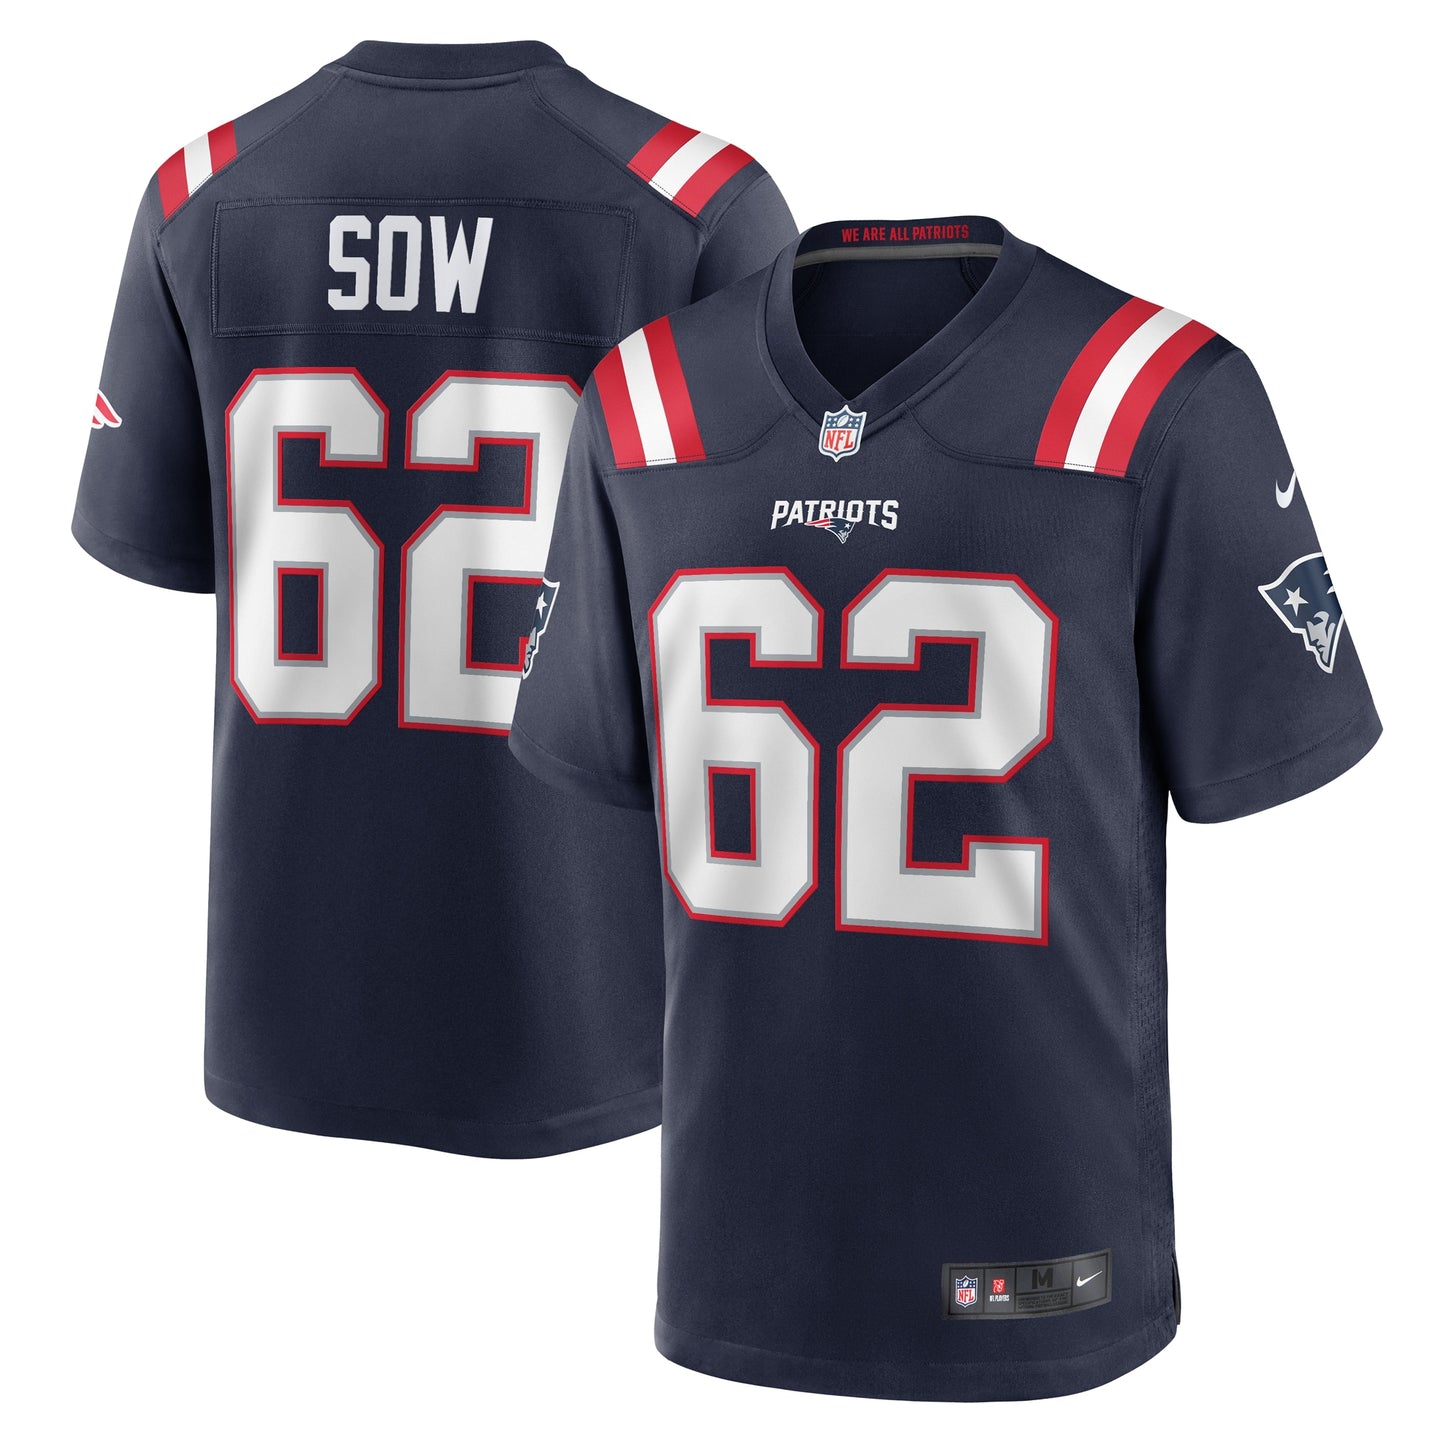 Sidy Sow New England Patriots Nike Team Game Jersey - Navy